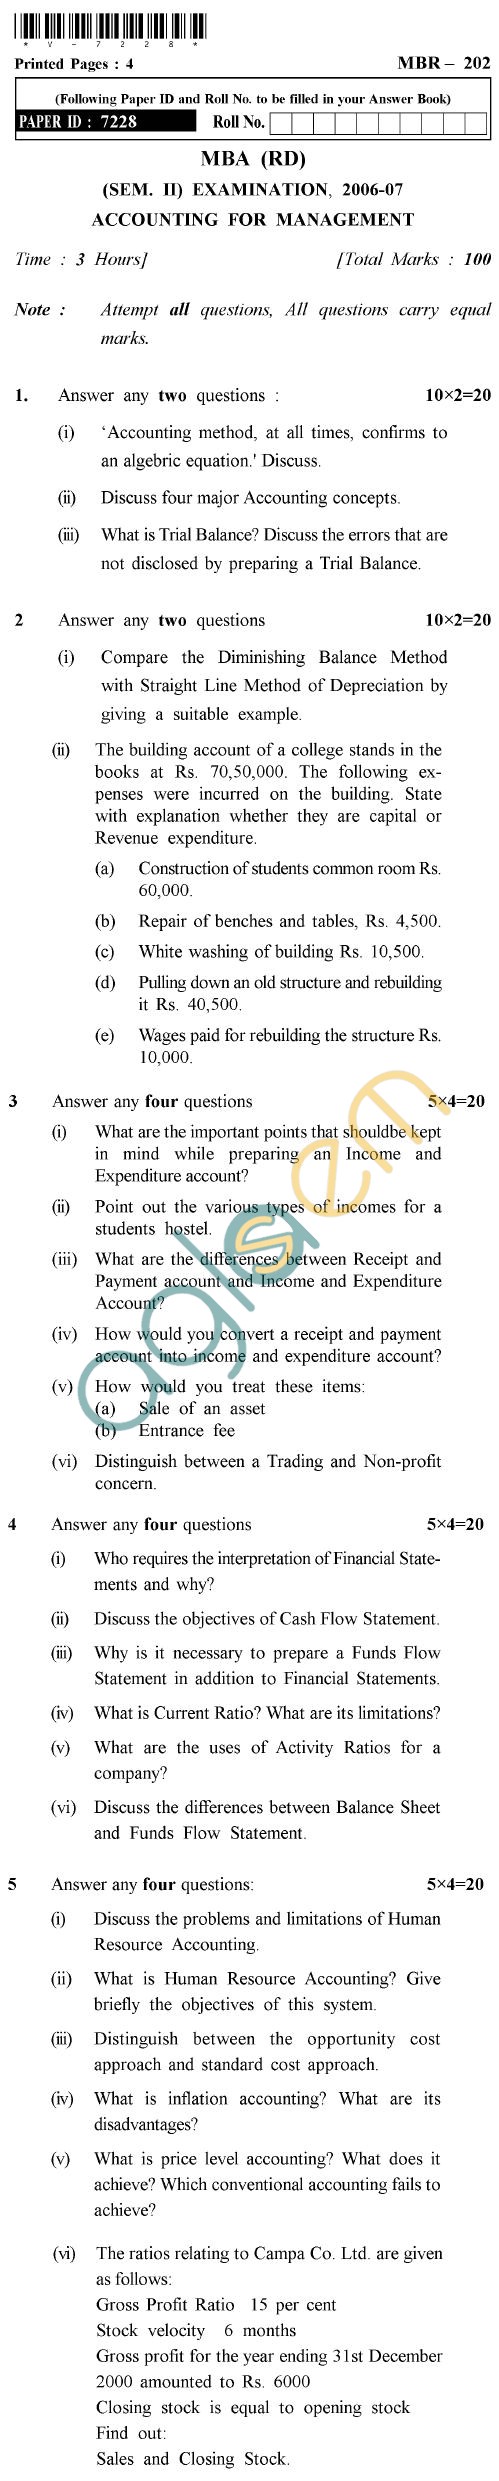 UPTU MBA (RD) Question Papers - MBR-202-Accounting for Management